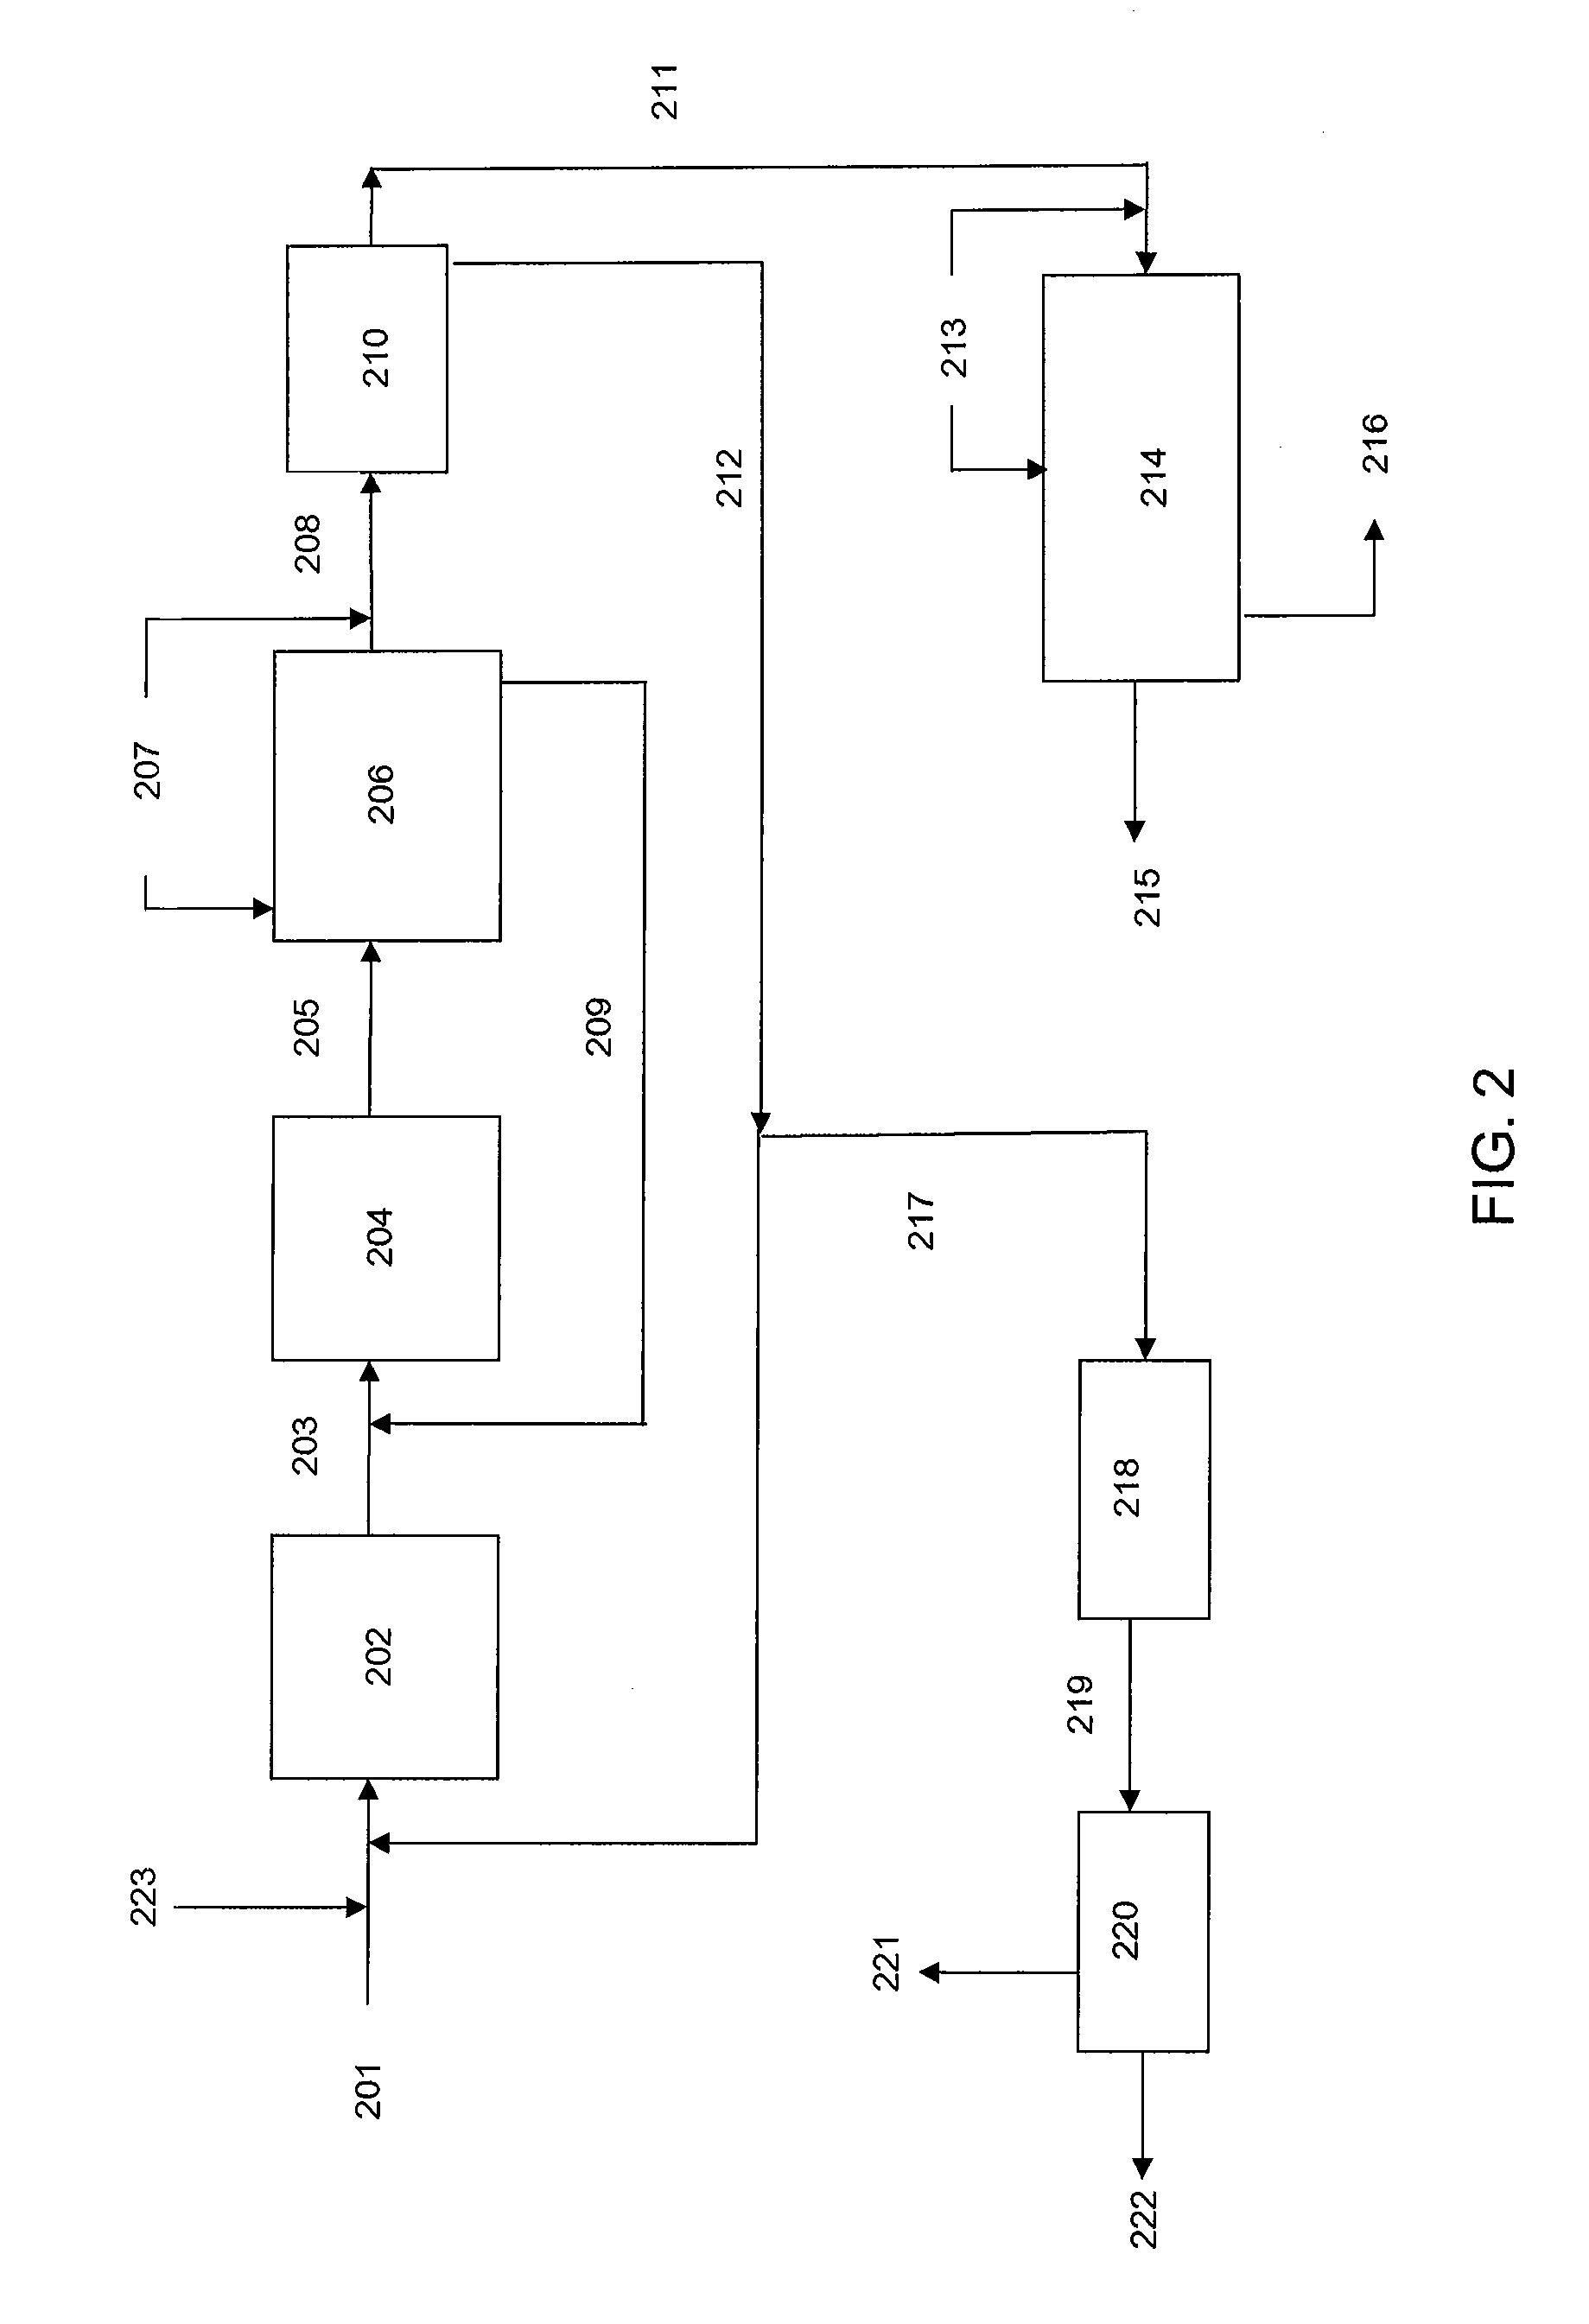 Method for wastewater treatment with resource recovery and reduced residual solids generation